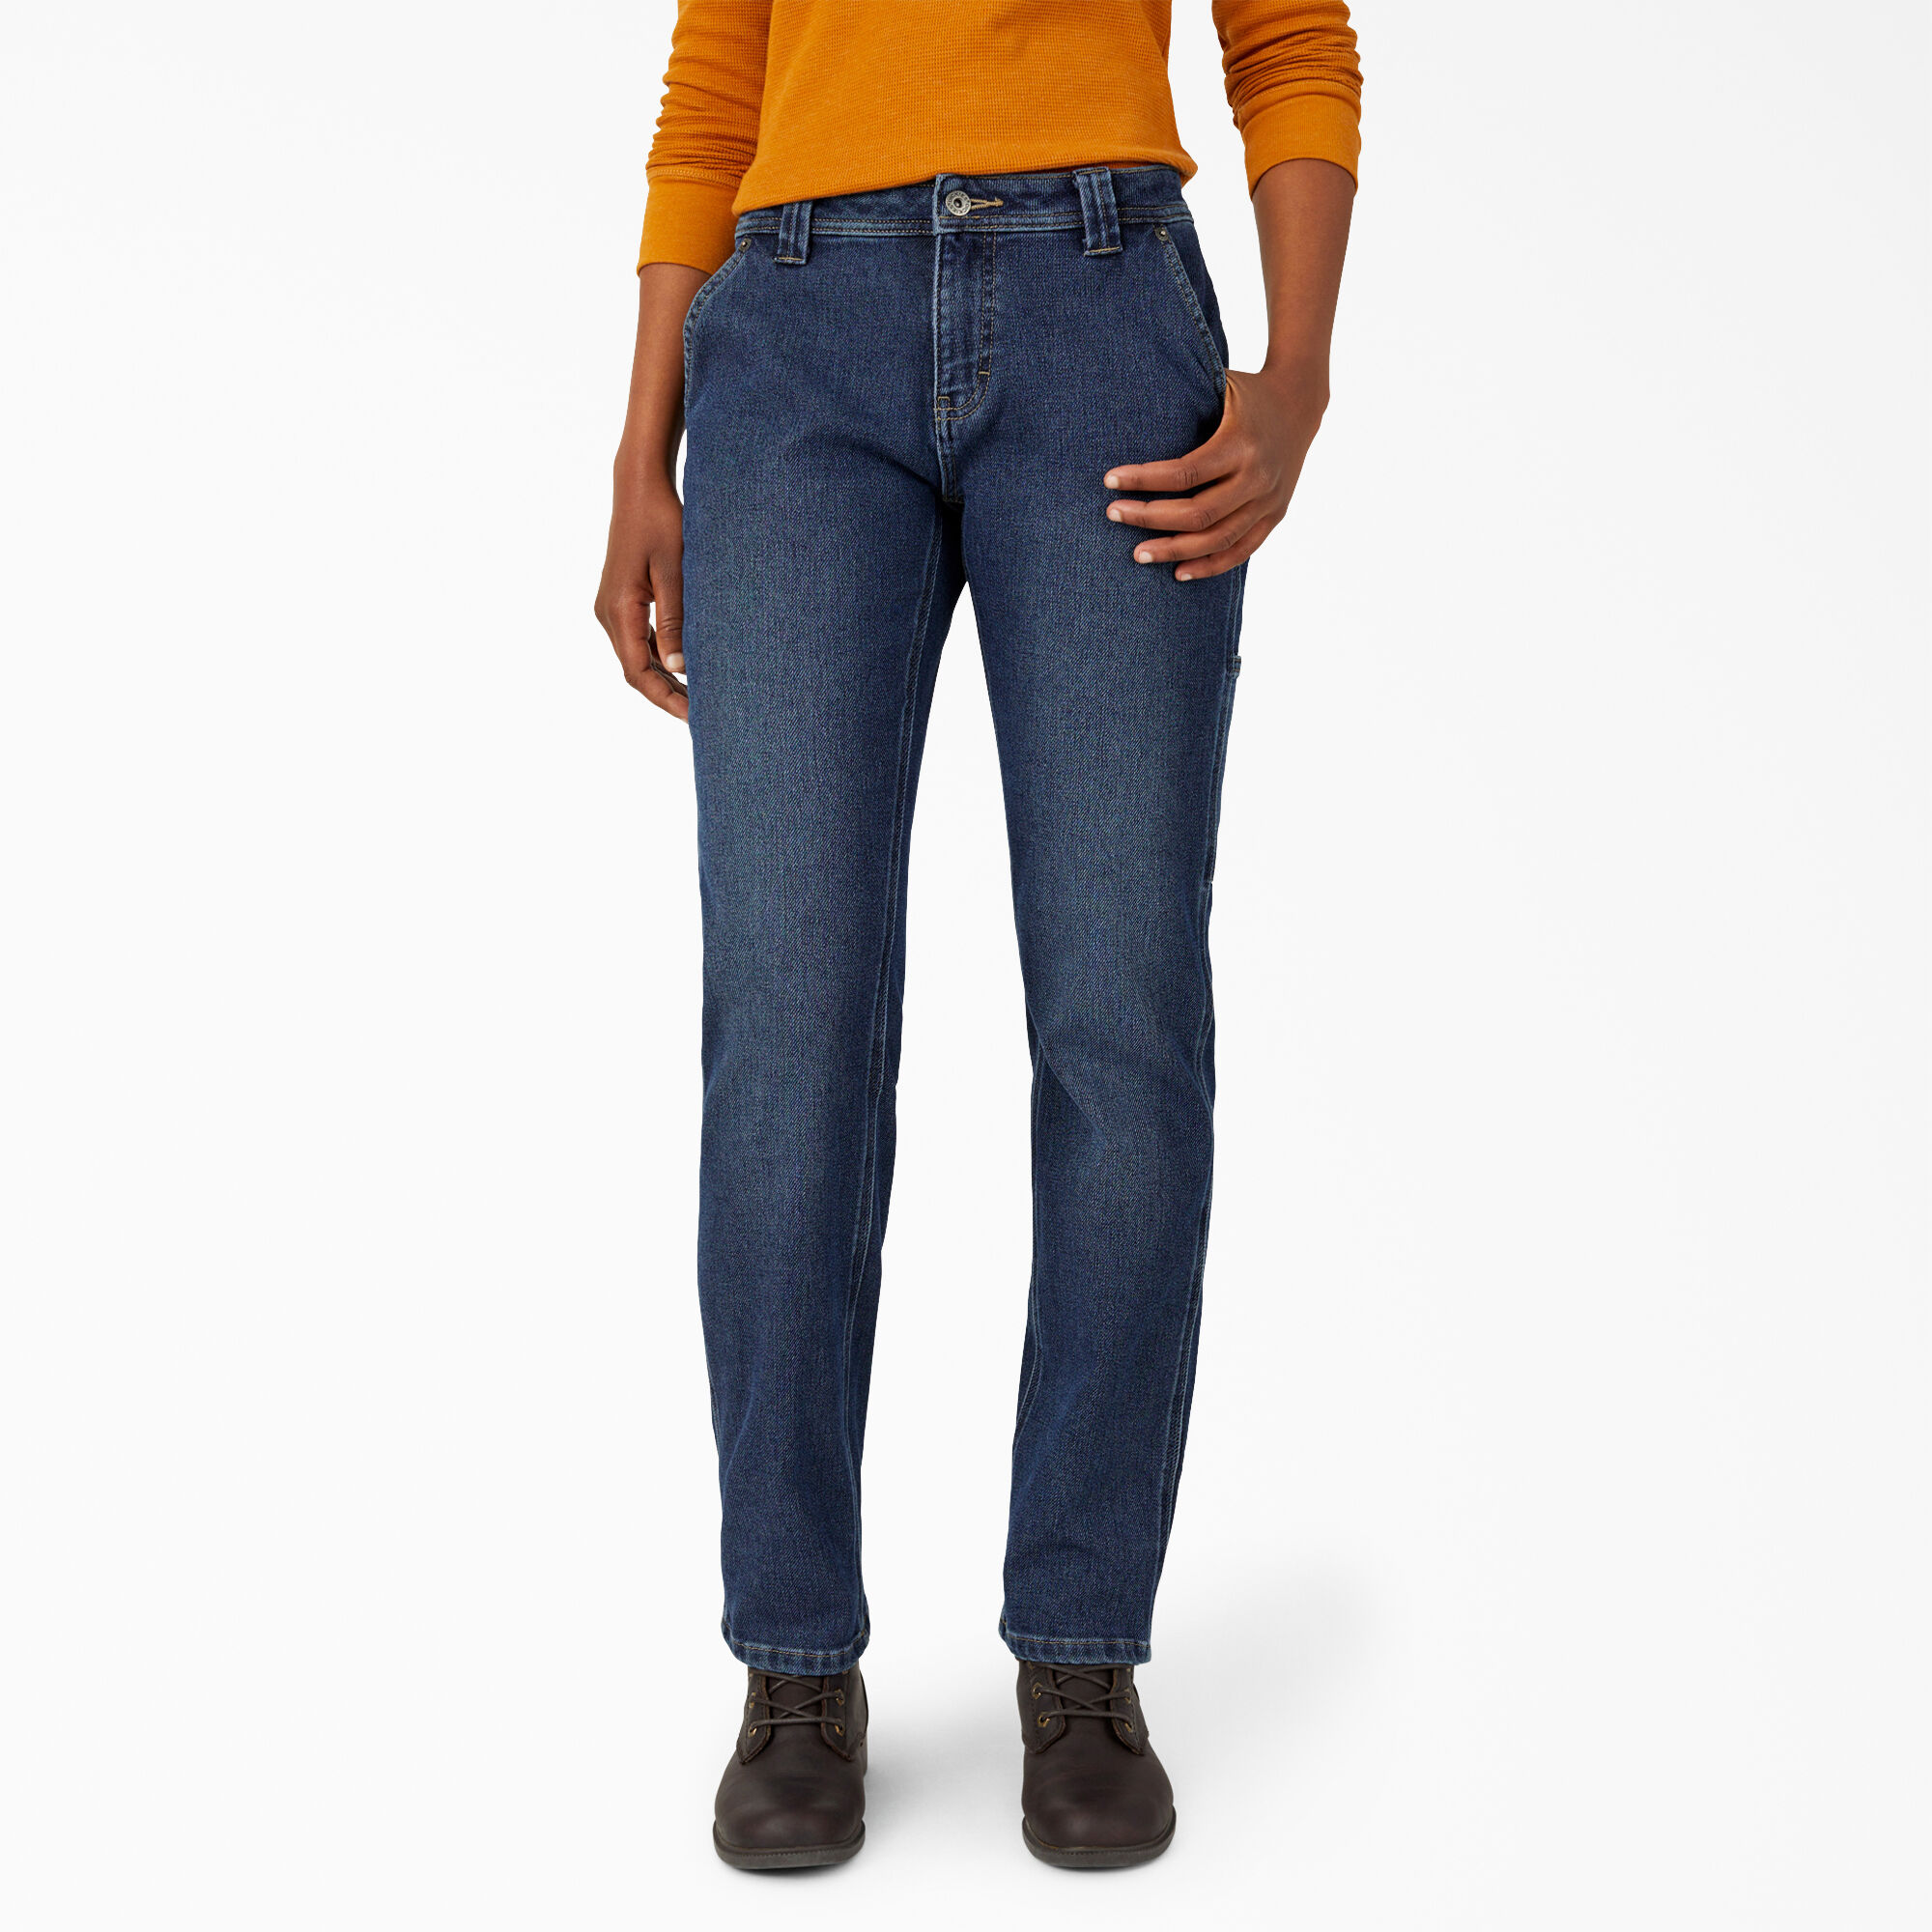 limeroad jeans for womens